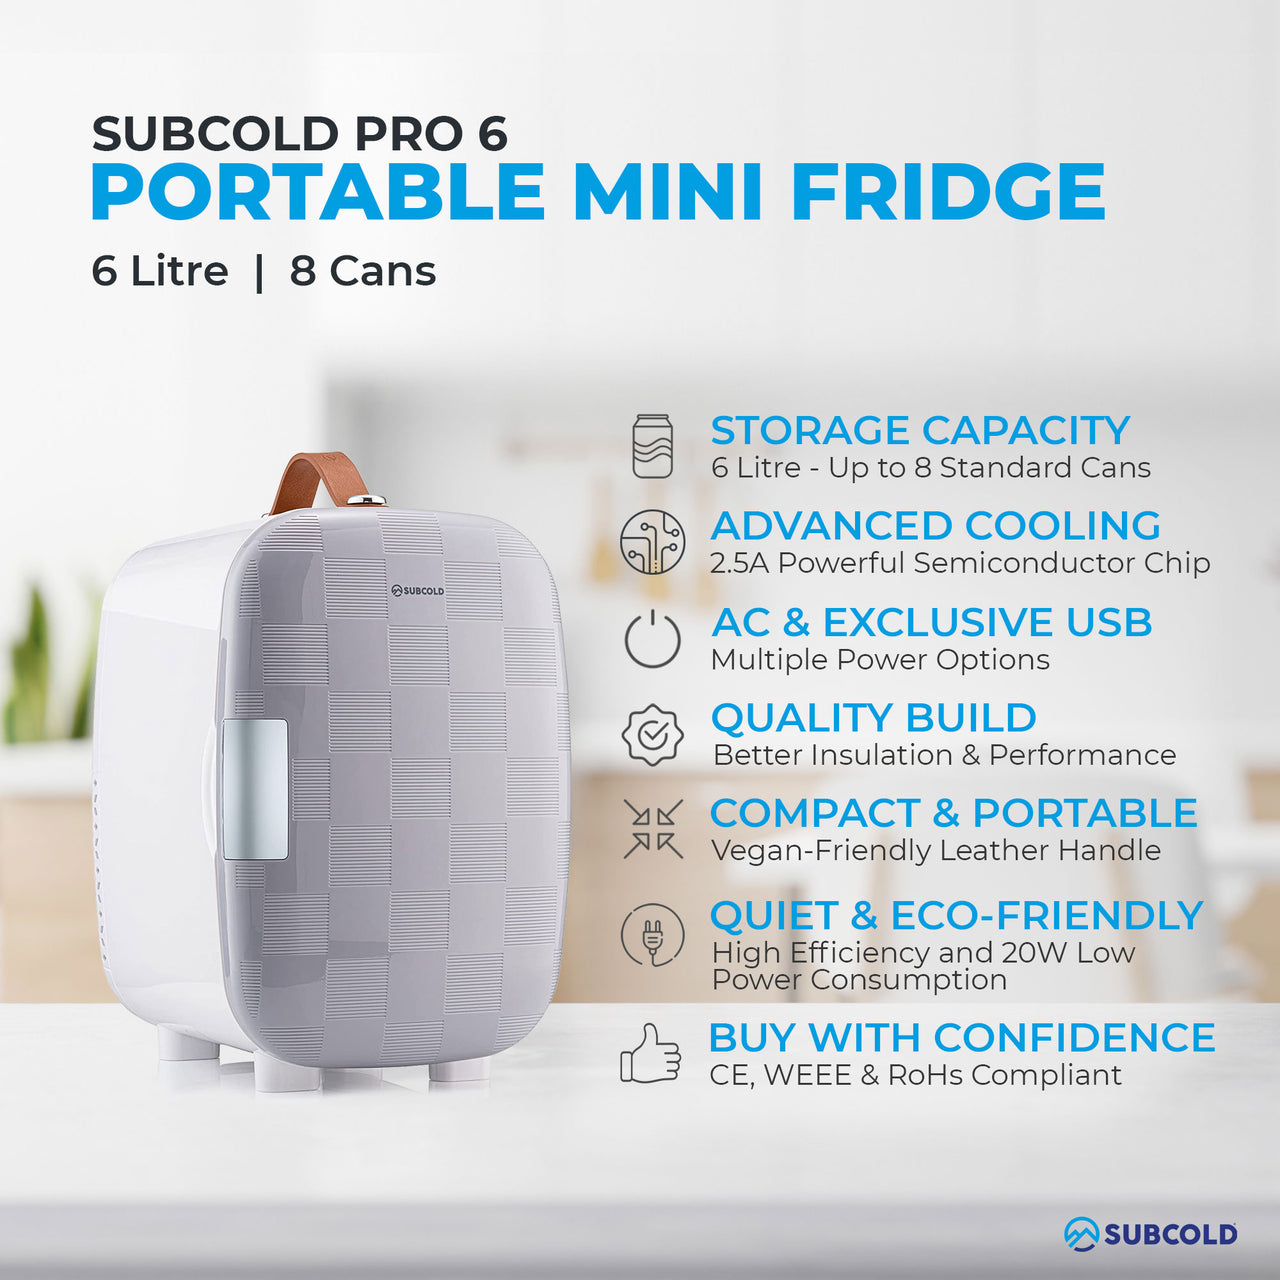 Subcold Pro 6 litre grey chequered mini fridge features infographic